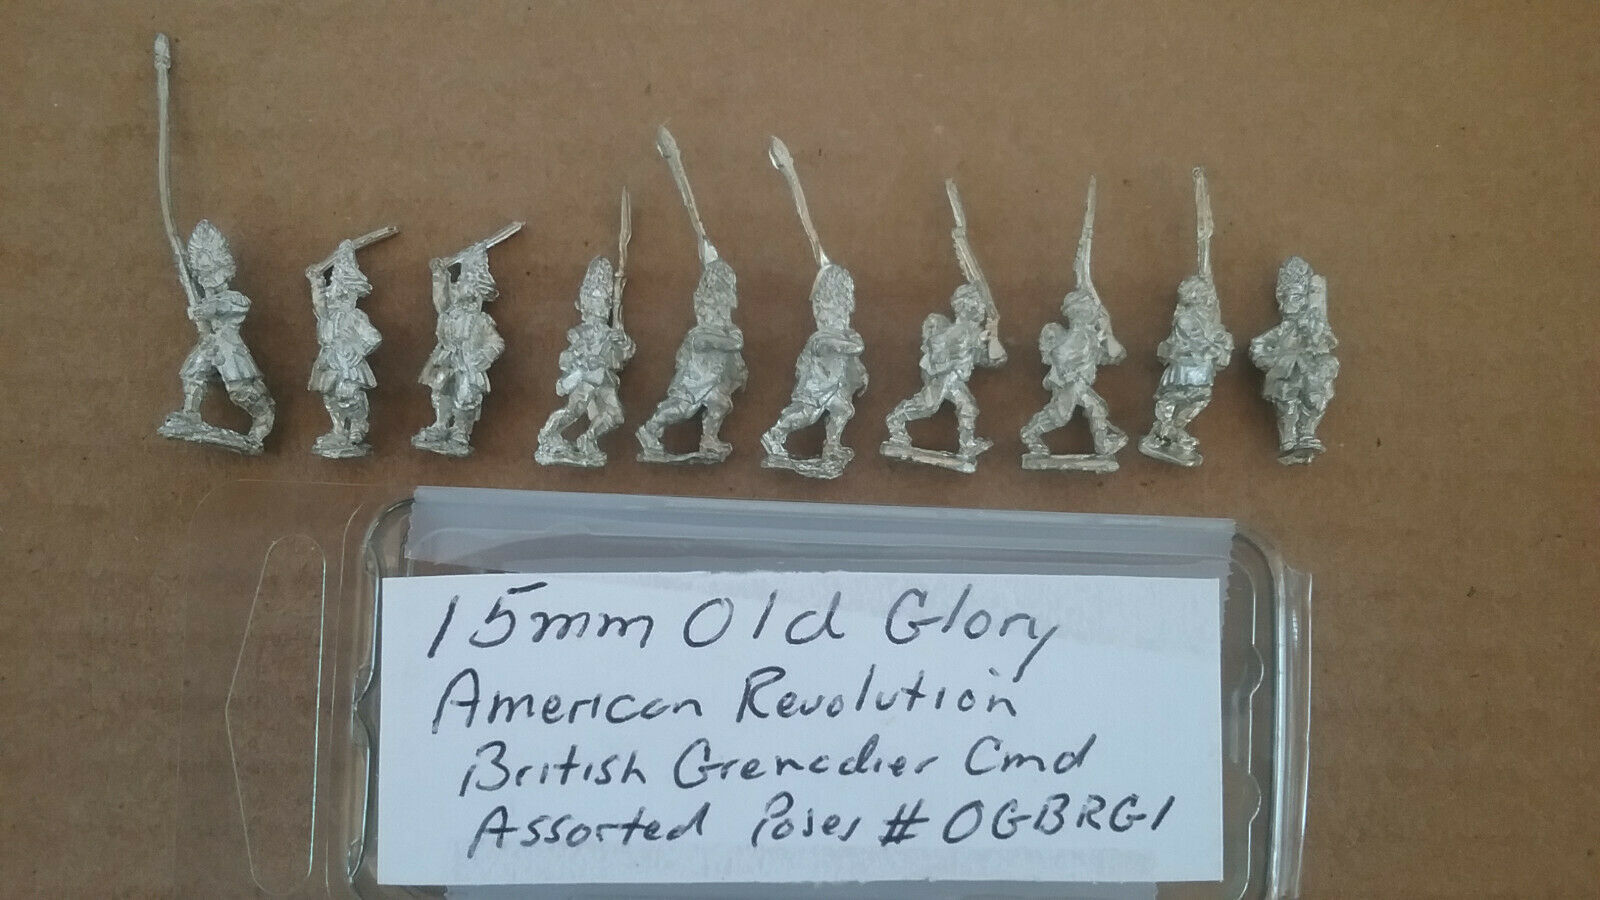 15mm Old Glory American Revolution British Grenadier Command  Assorted Poses